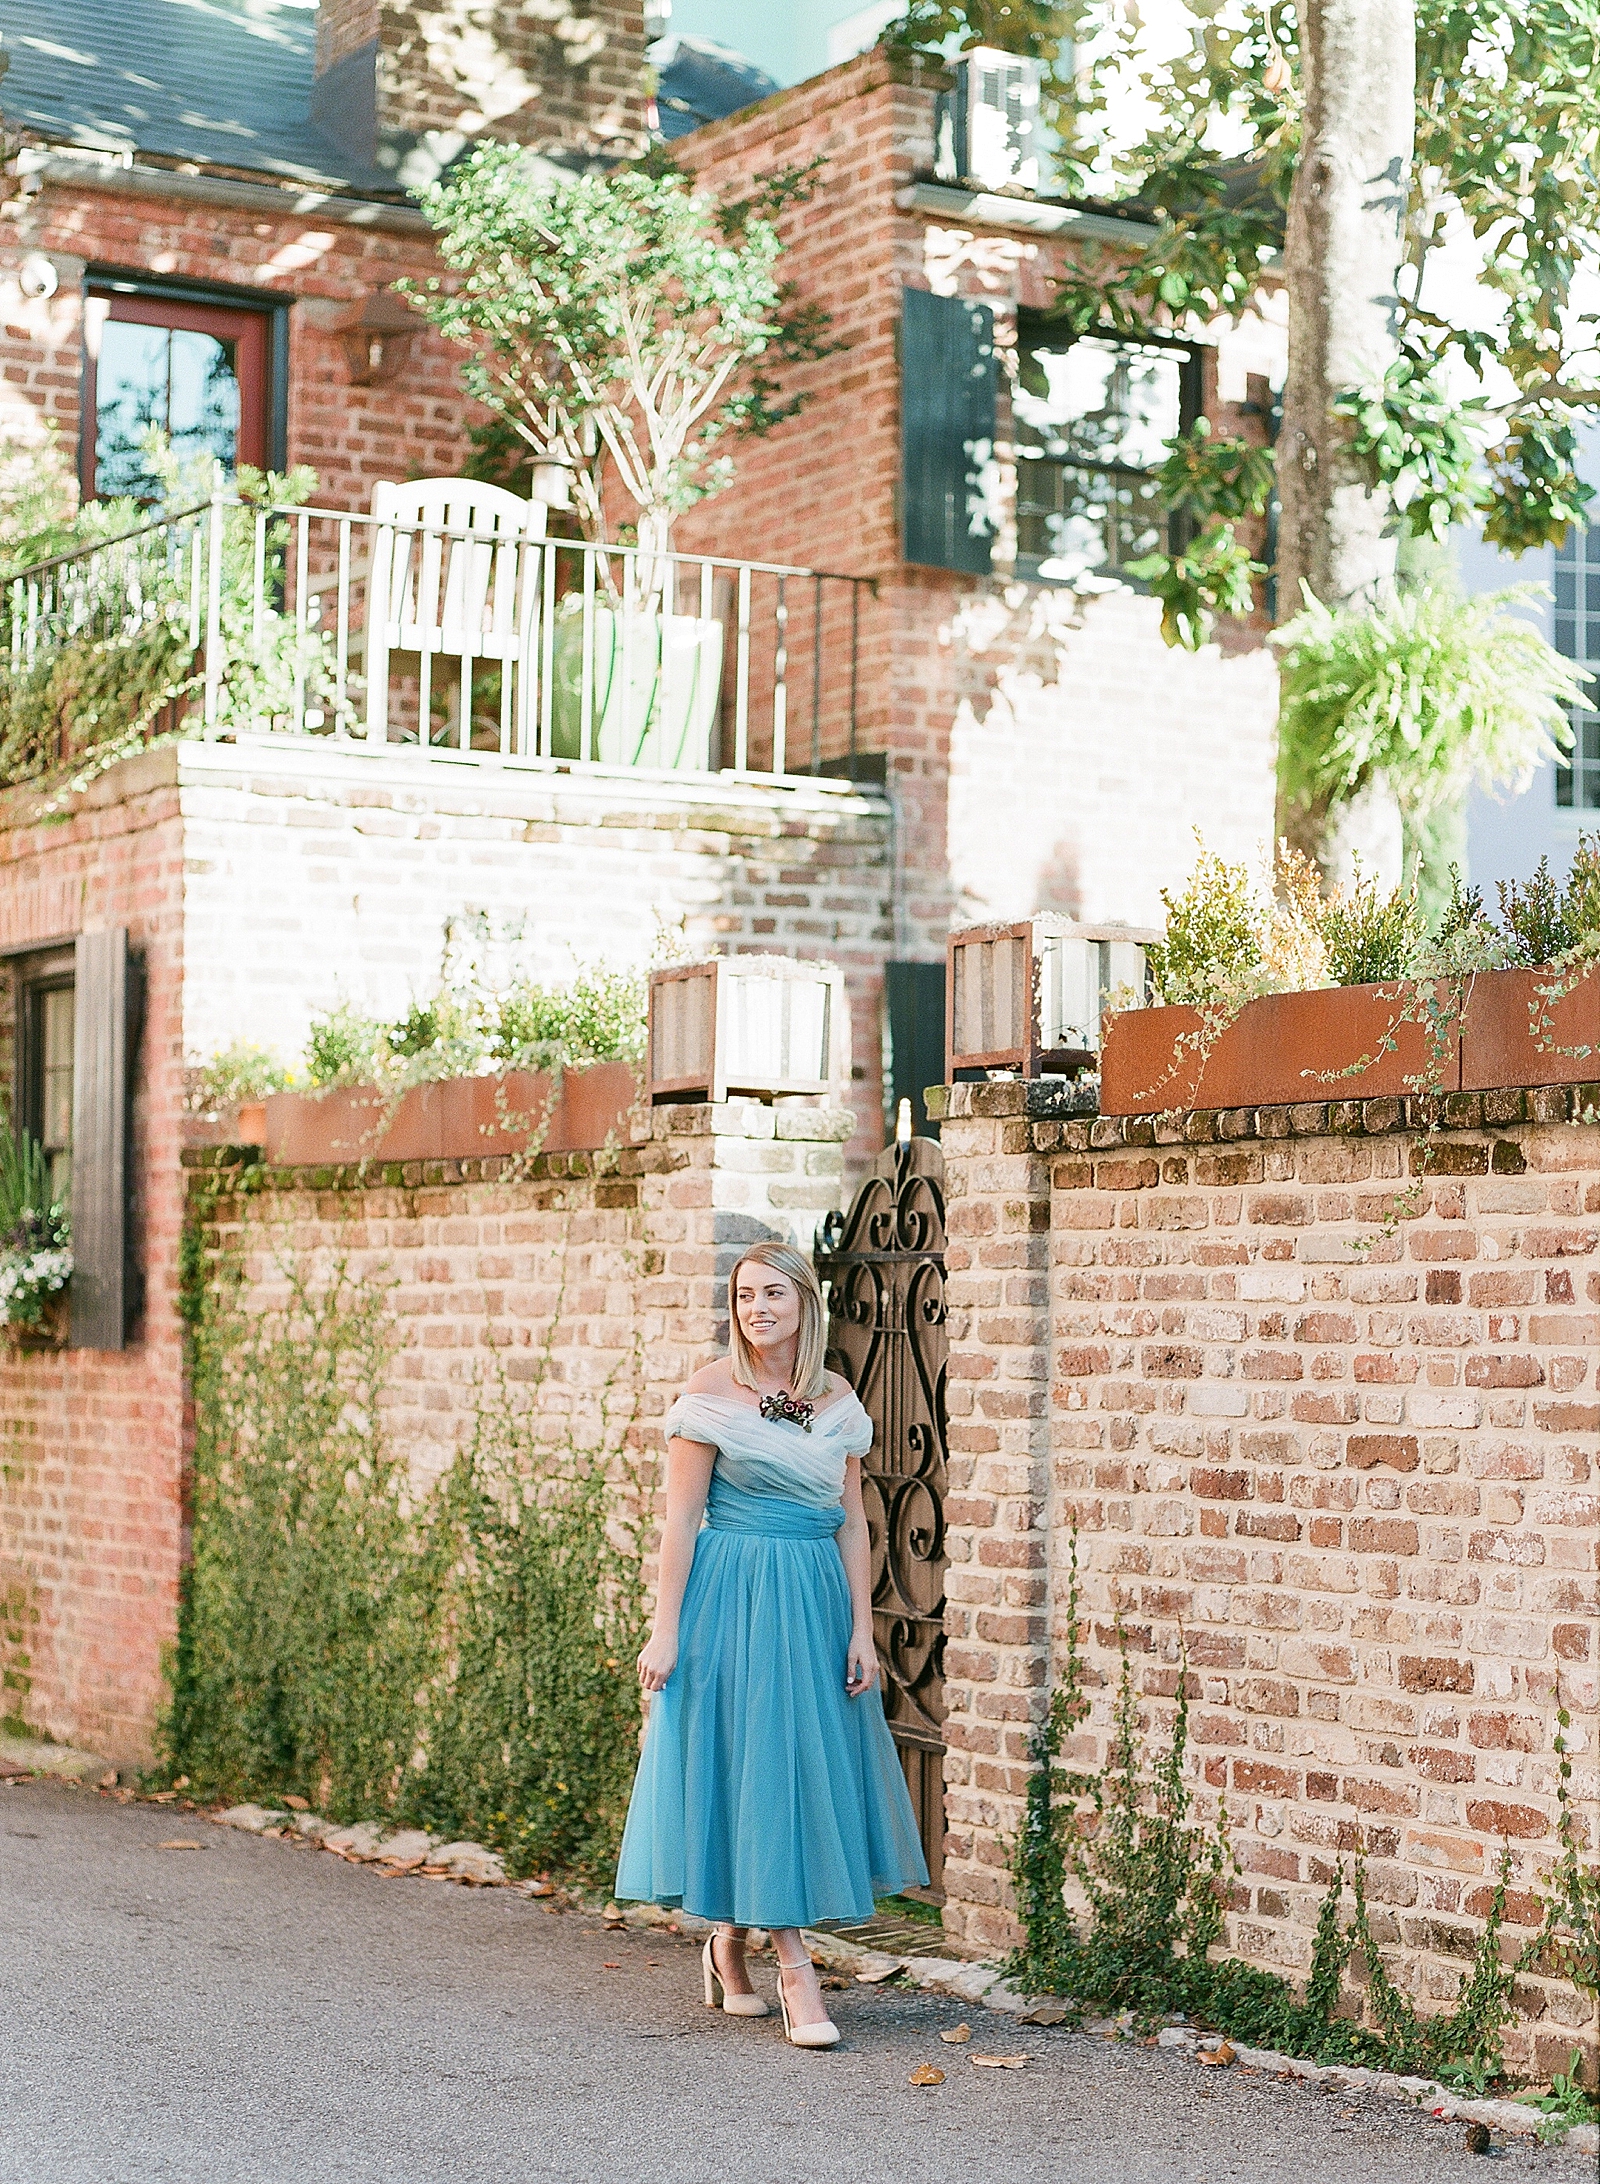 Downtown Charleston Jamie in Blue Dress Walking in front of Brick Wall